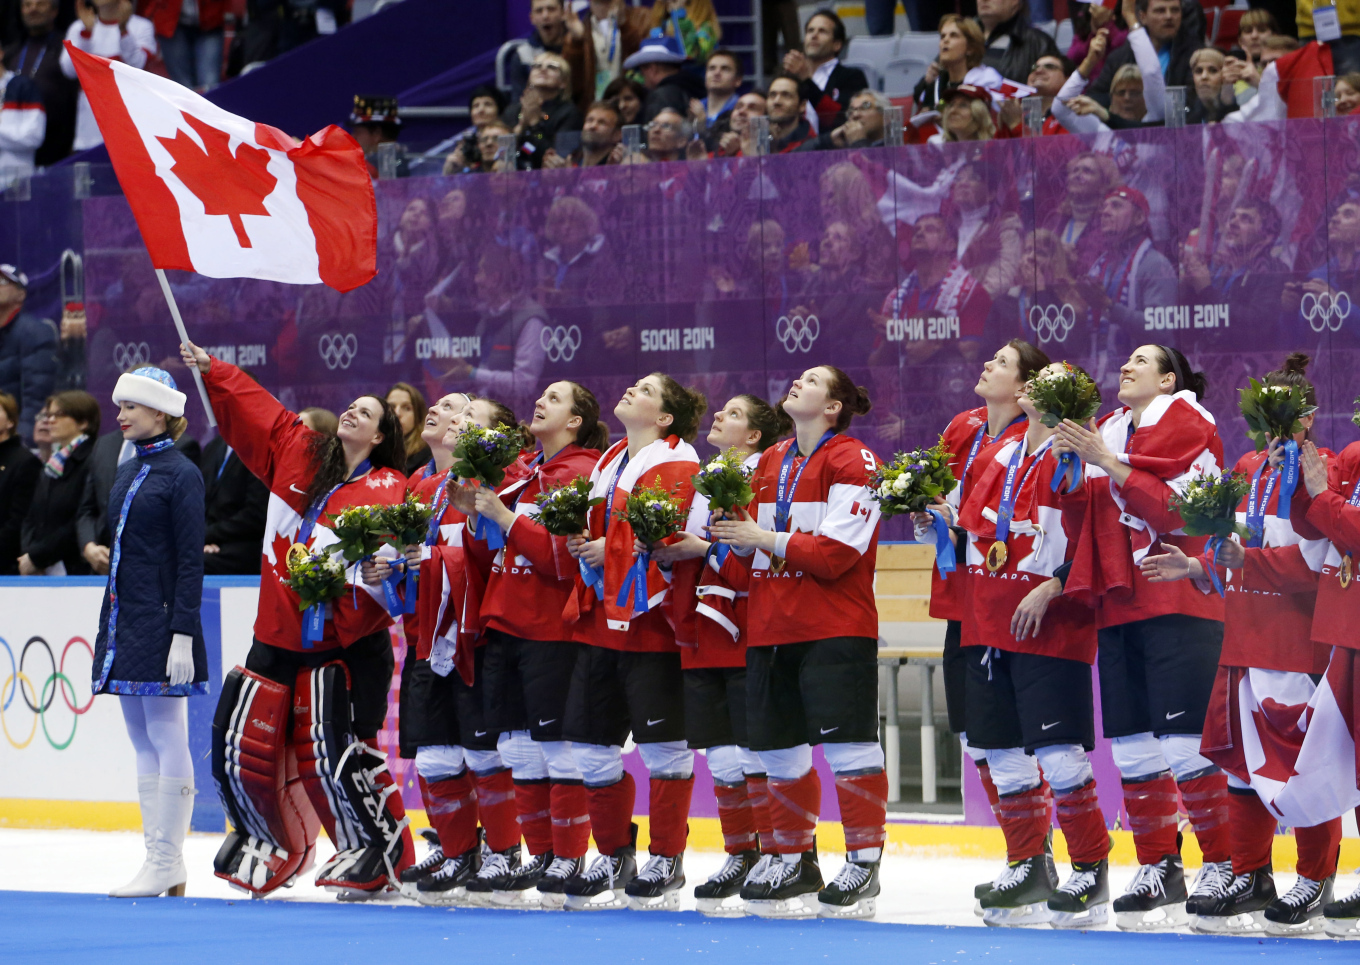 Team Canada sings the Canadian national anthem after receiving their gold medals after beating the USA 3-2 in overtime of the women's gold medal ice hockey game at the 2014 Winter Olympics, Friday, Feb. 21, 2014, in Sochi, Russia. (AP Photo/Mark Humphrey)